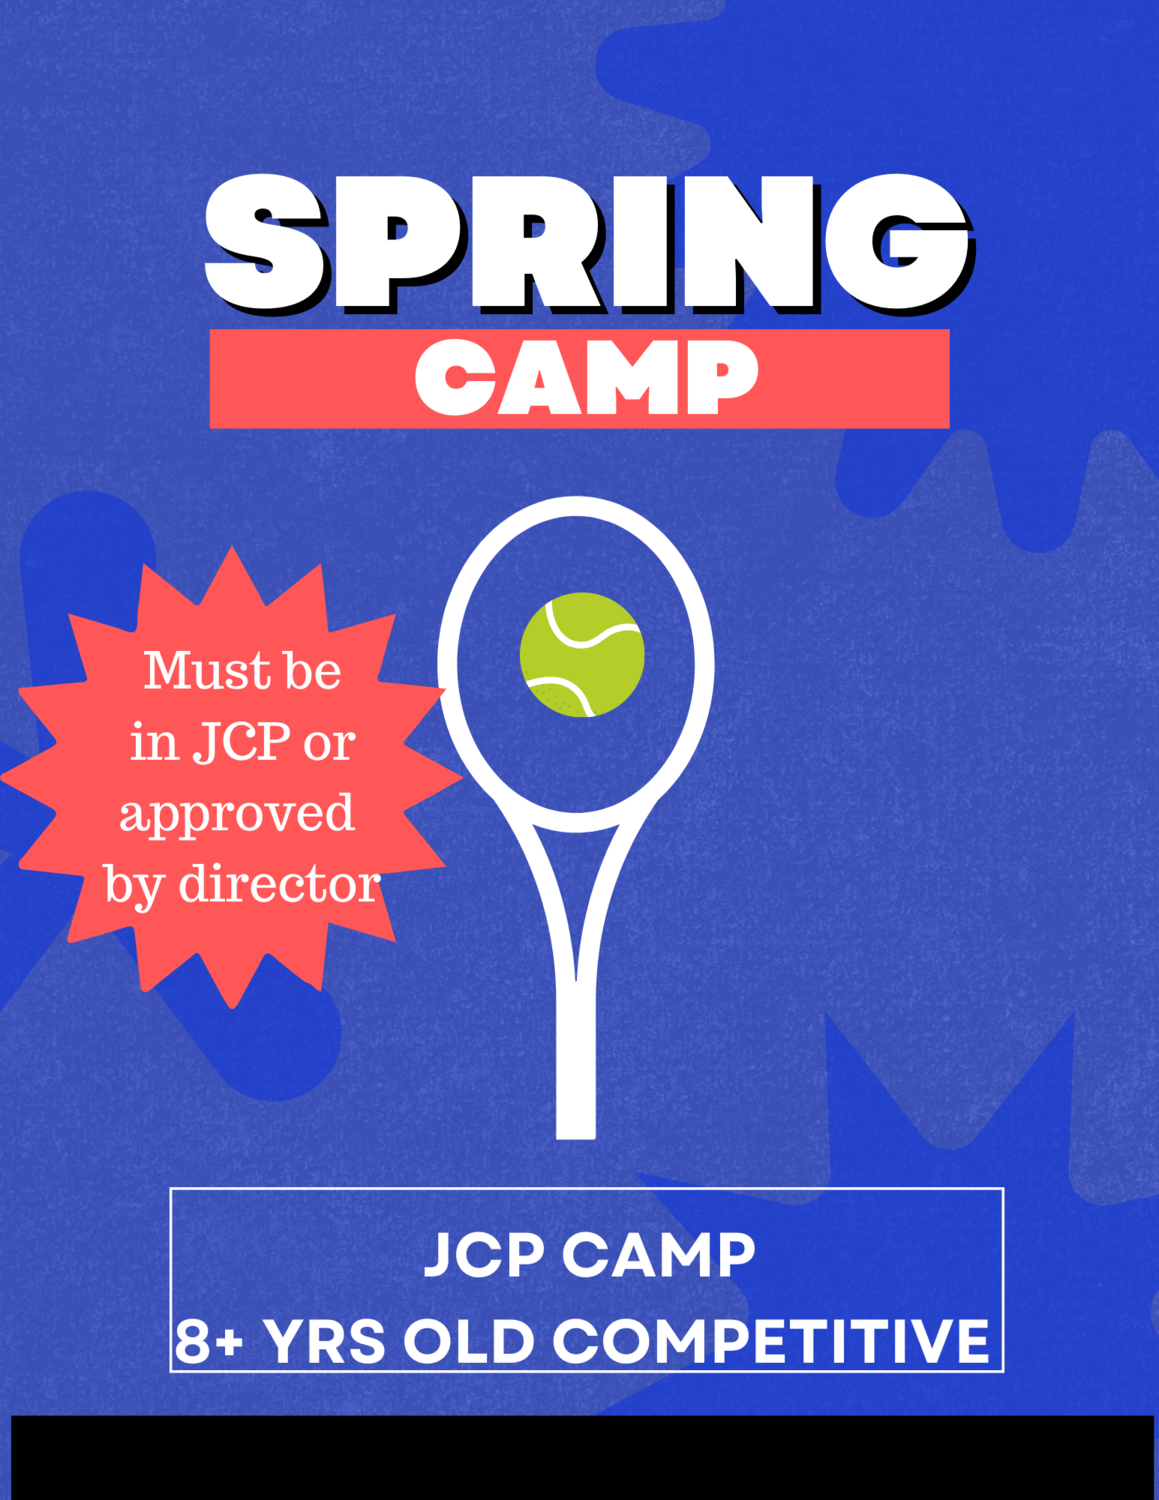 JCP CAMP - 8+ YRS OLD COMPETITIVE
*MUST BE APRROVED*